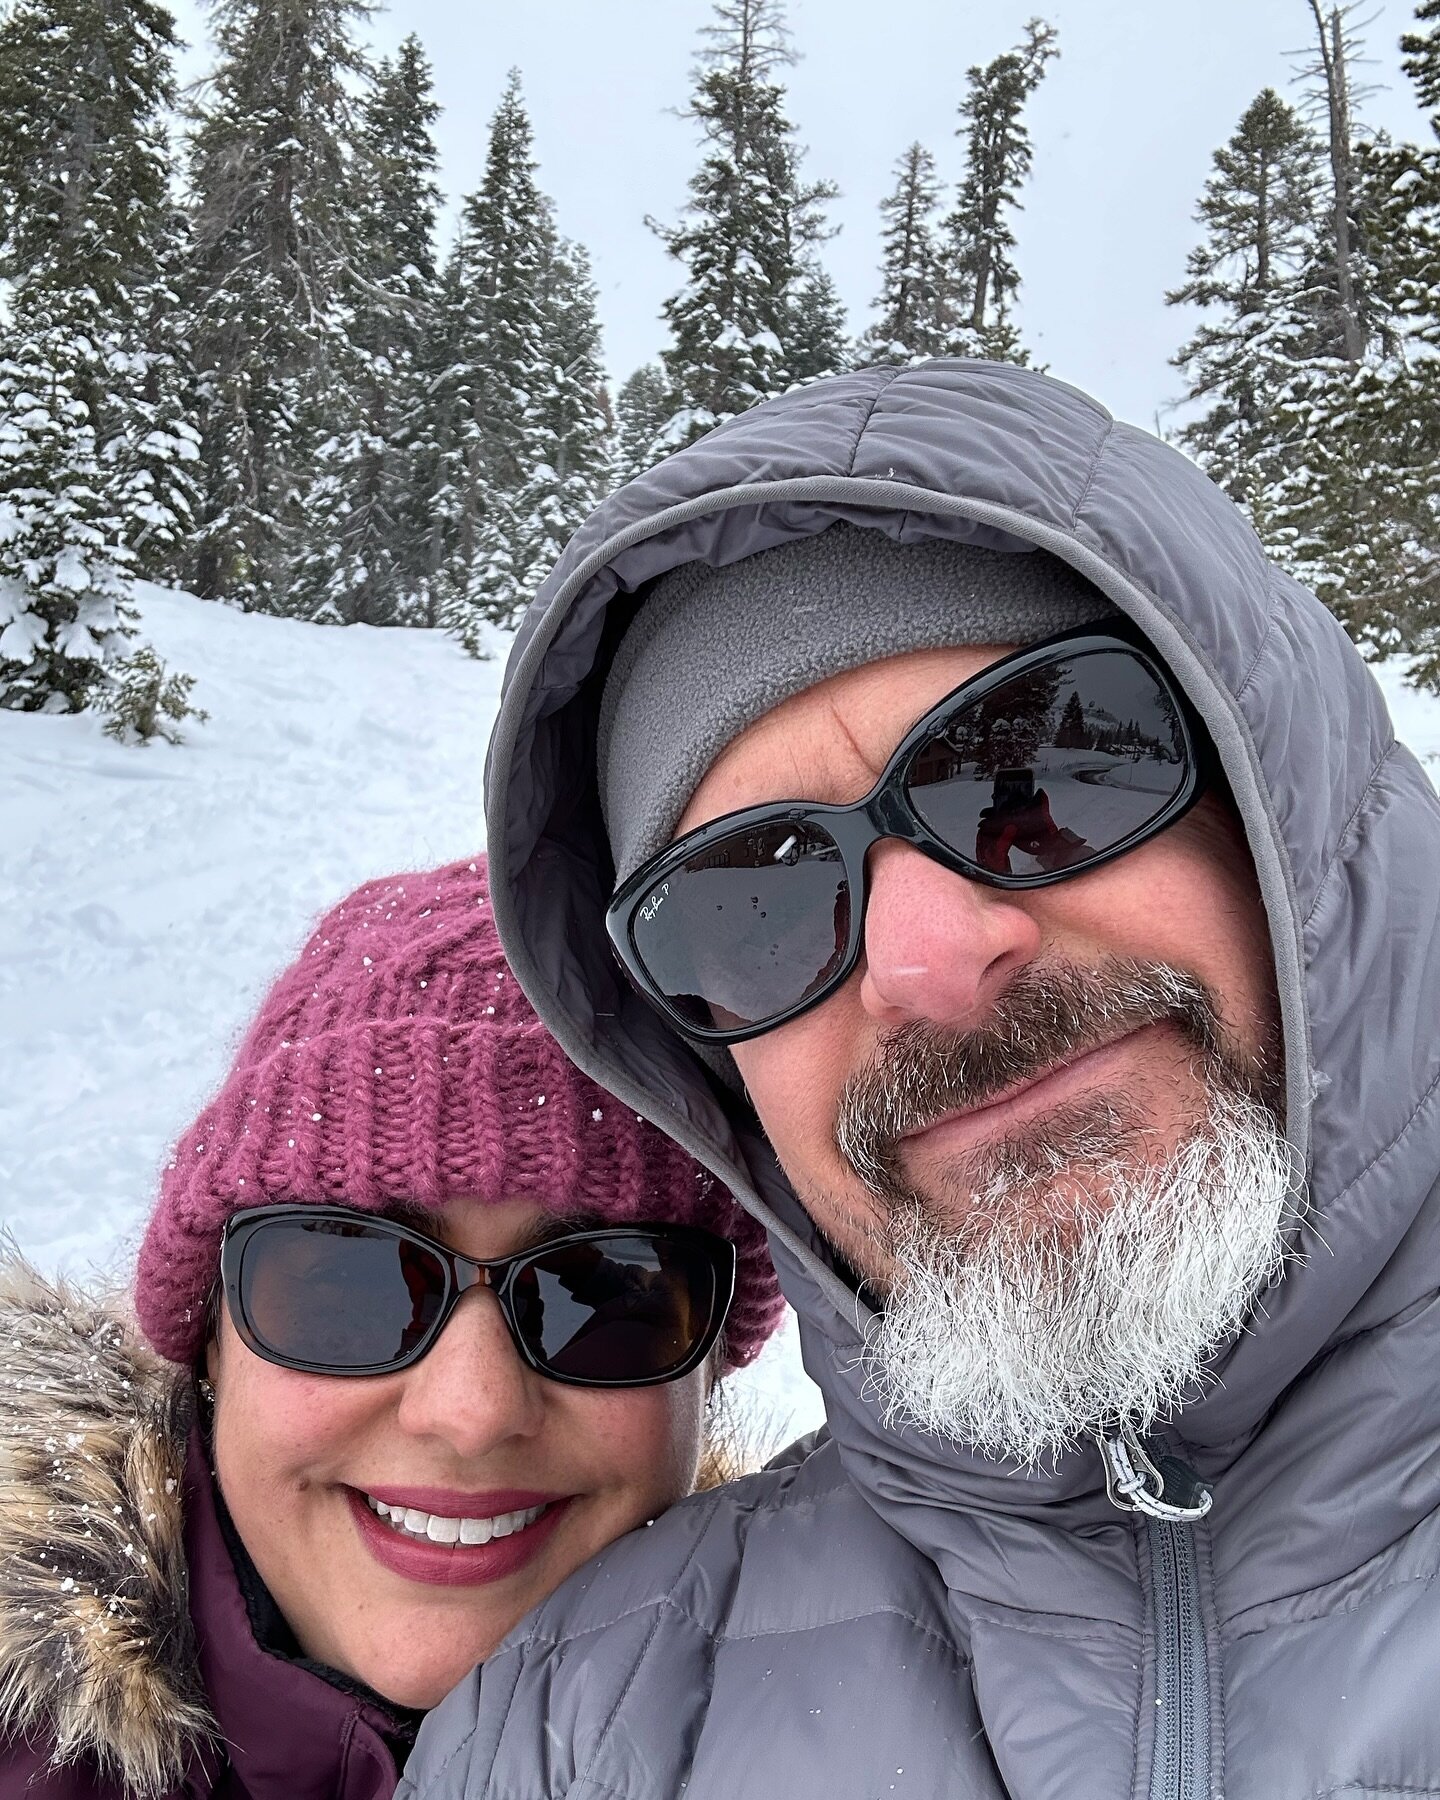 Up in the snow with the hubby for a quick Easter getaway. Getting the most out of my winter knits and some much needed R&amp;R. Hubby is rocking my extra pair of sunglasses&hellip; he left his at home. 😂